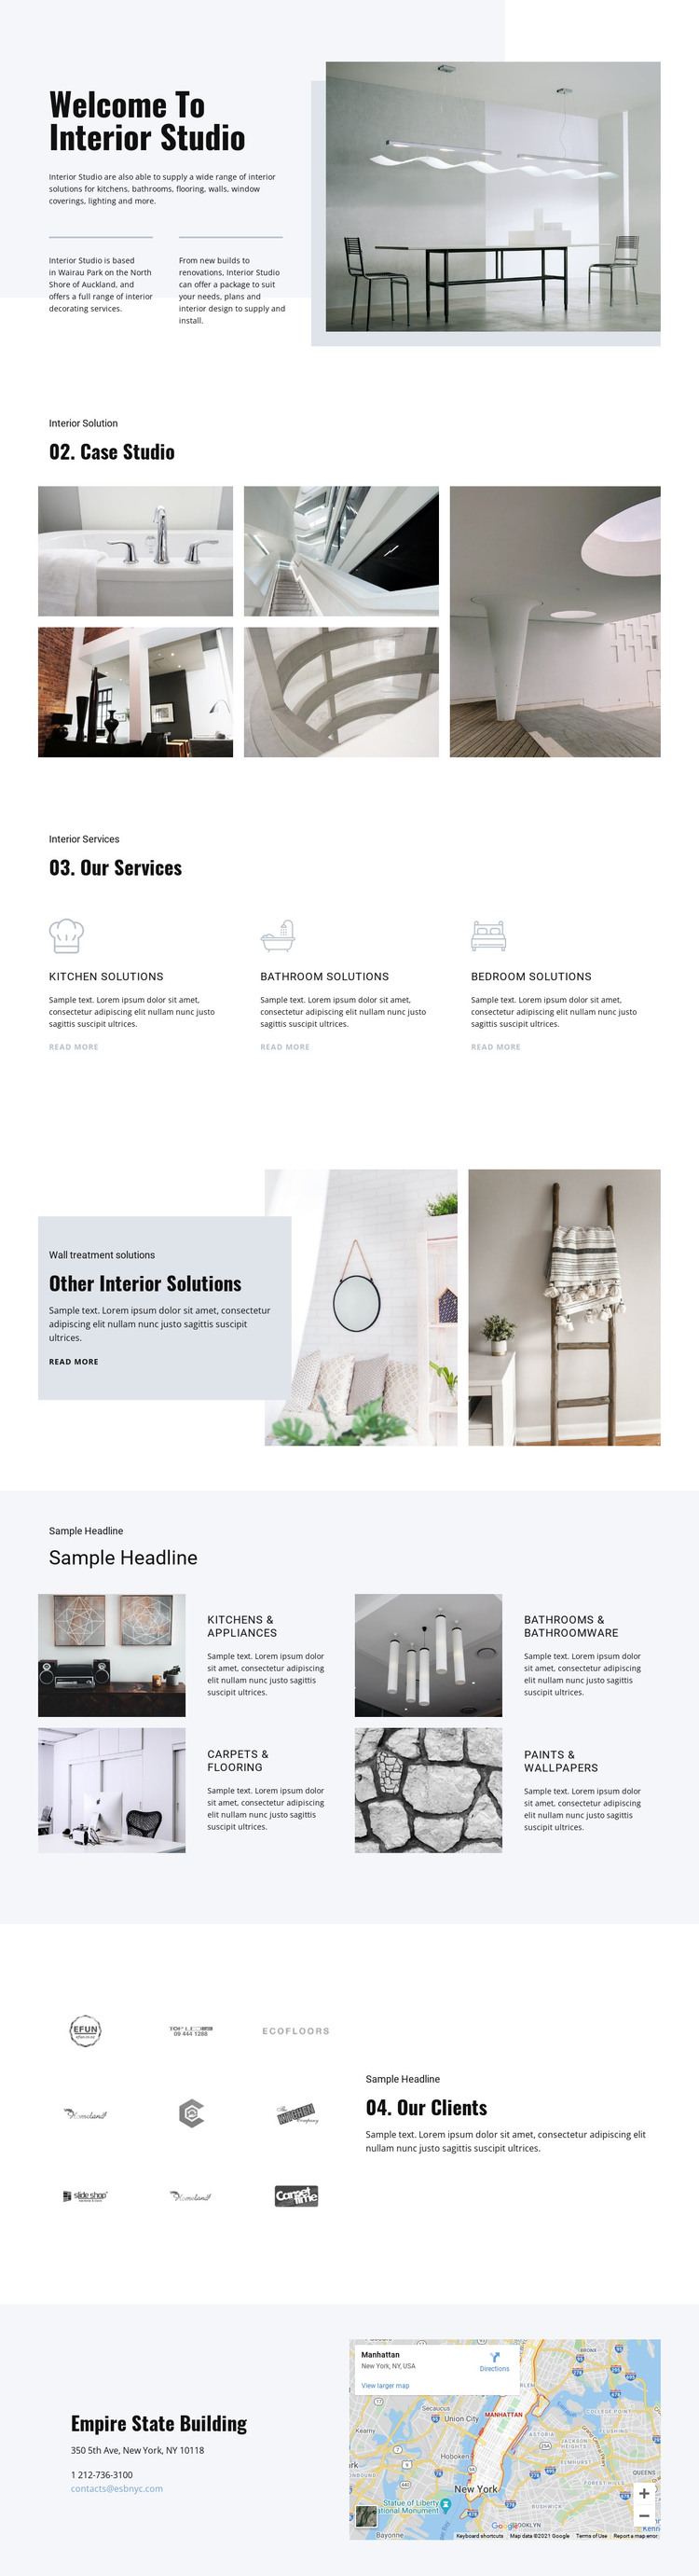 Welcome to interior studio HTML Template